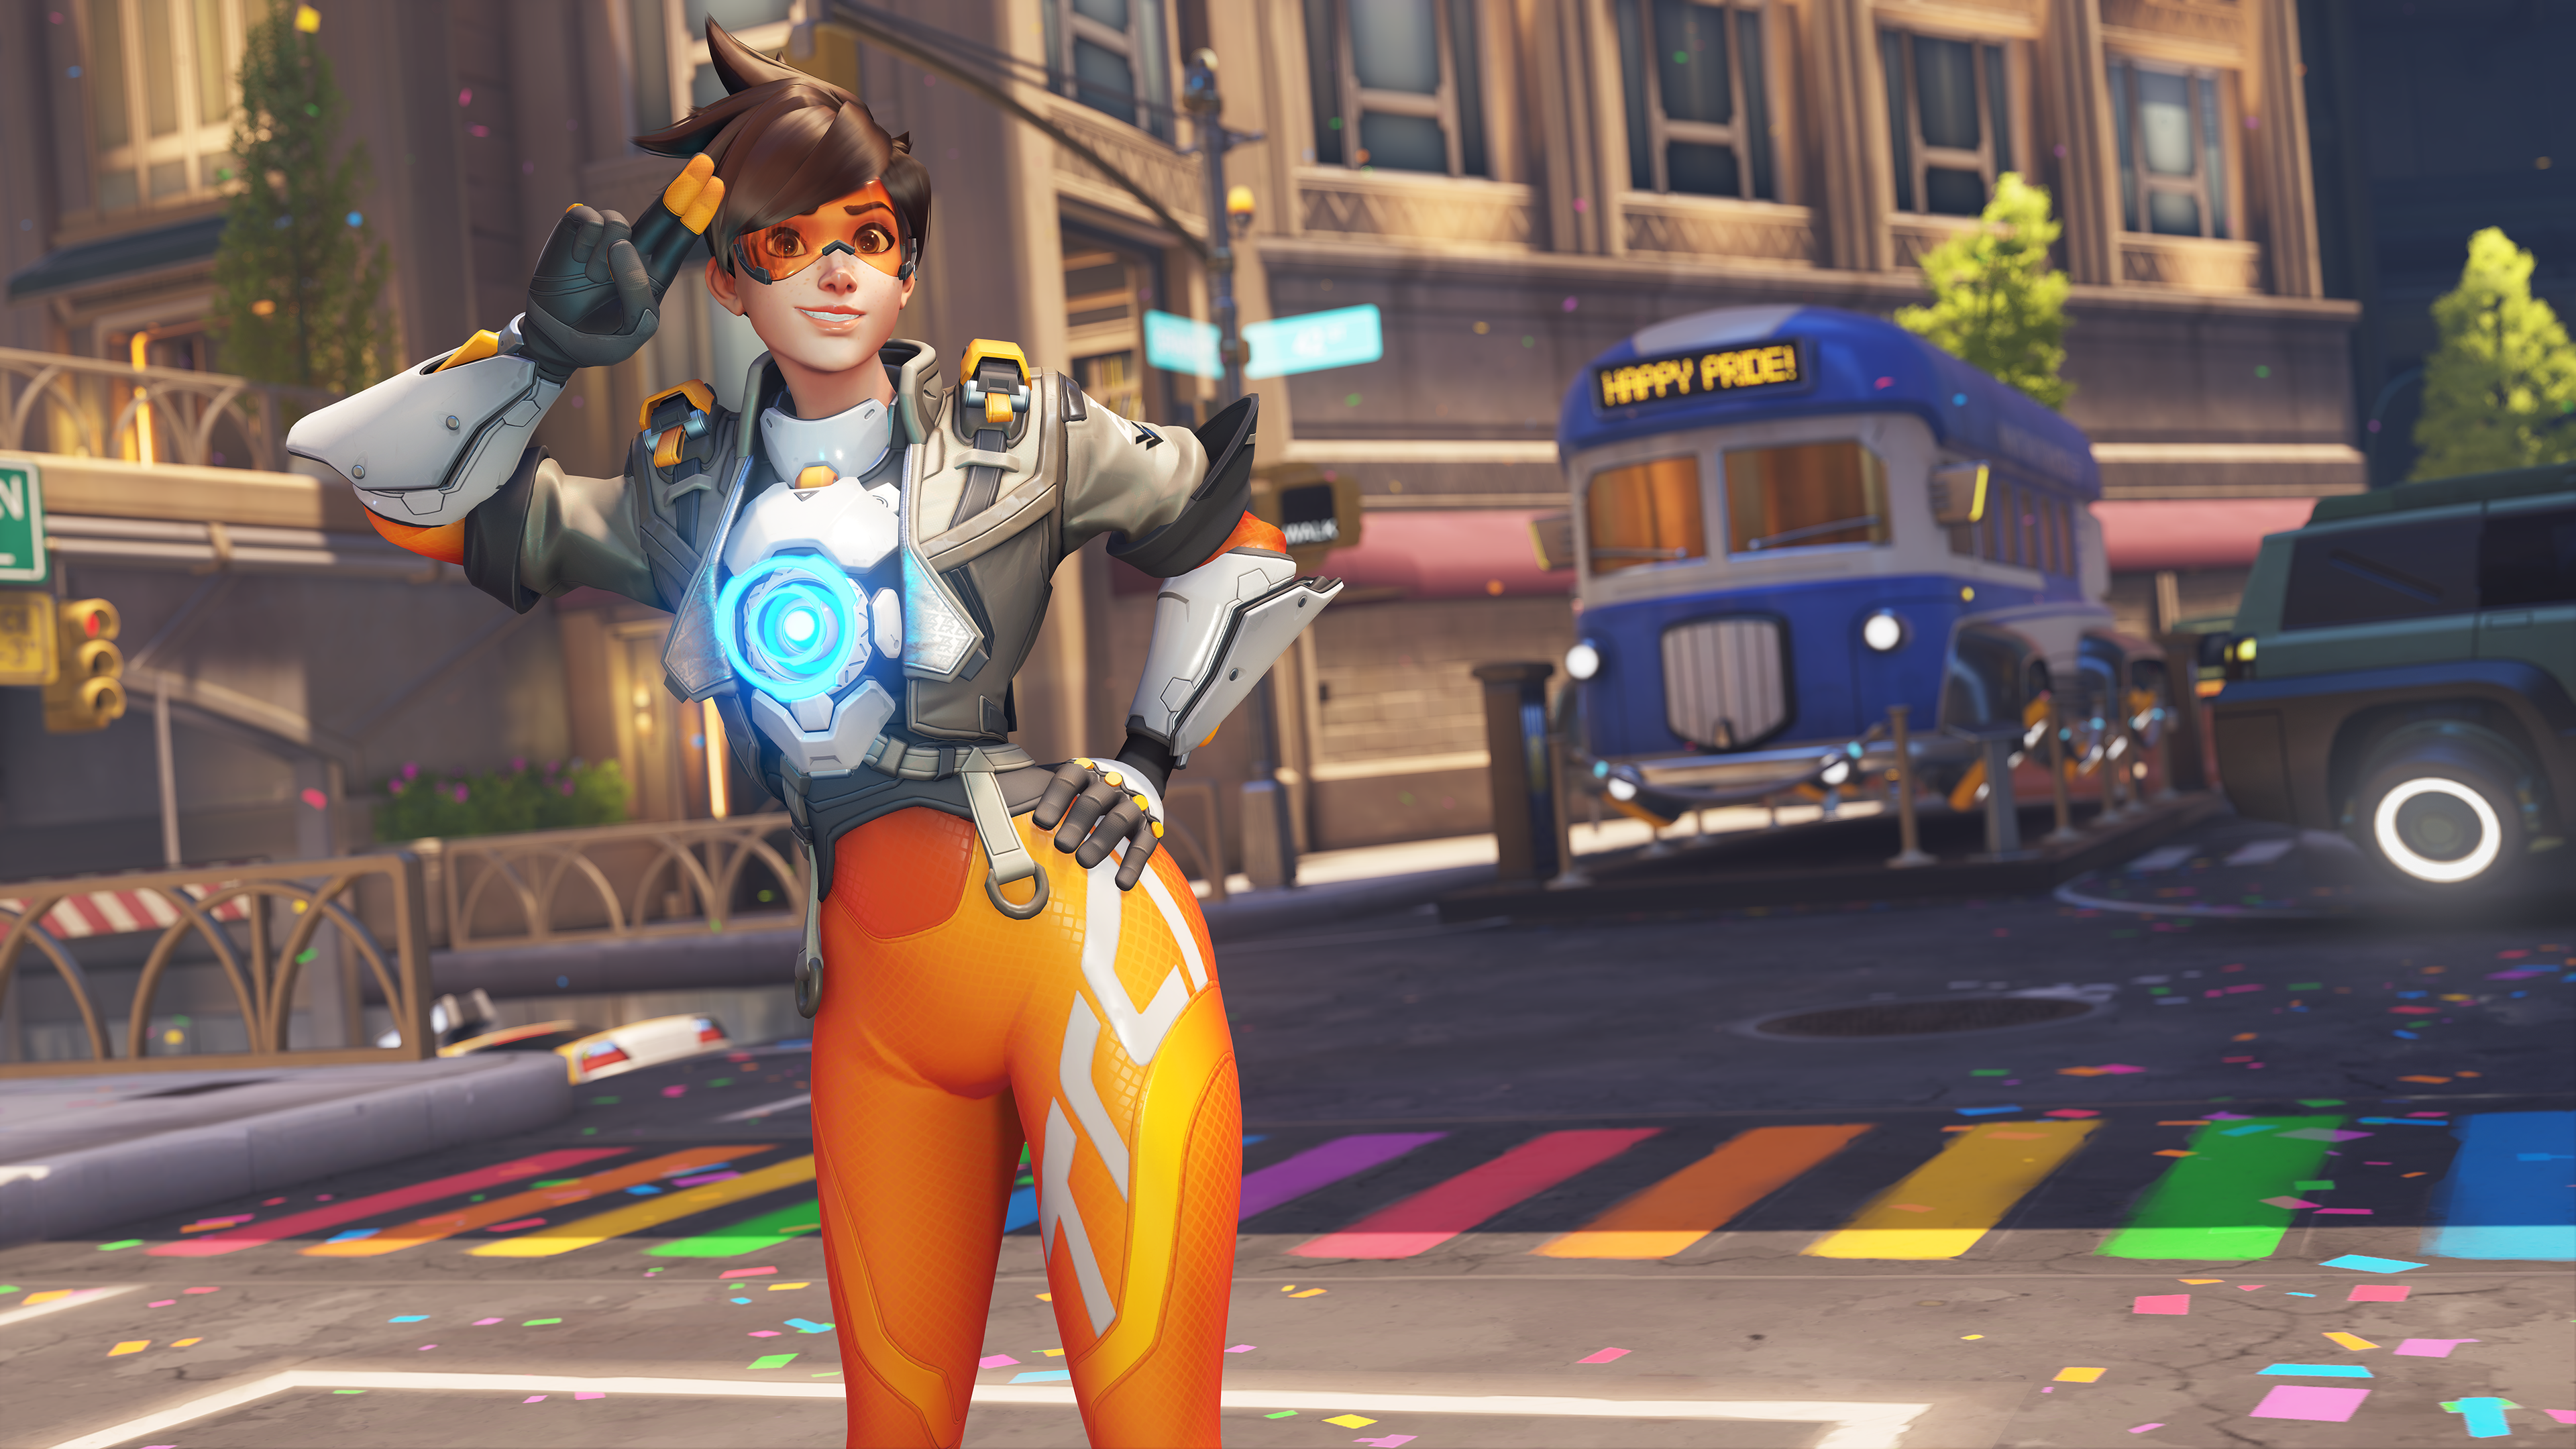 Tracer (Cara Theobold) celebrates Pride Month in Overwatch 2 (2022), Blizzard Entertainment